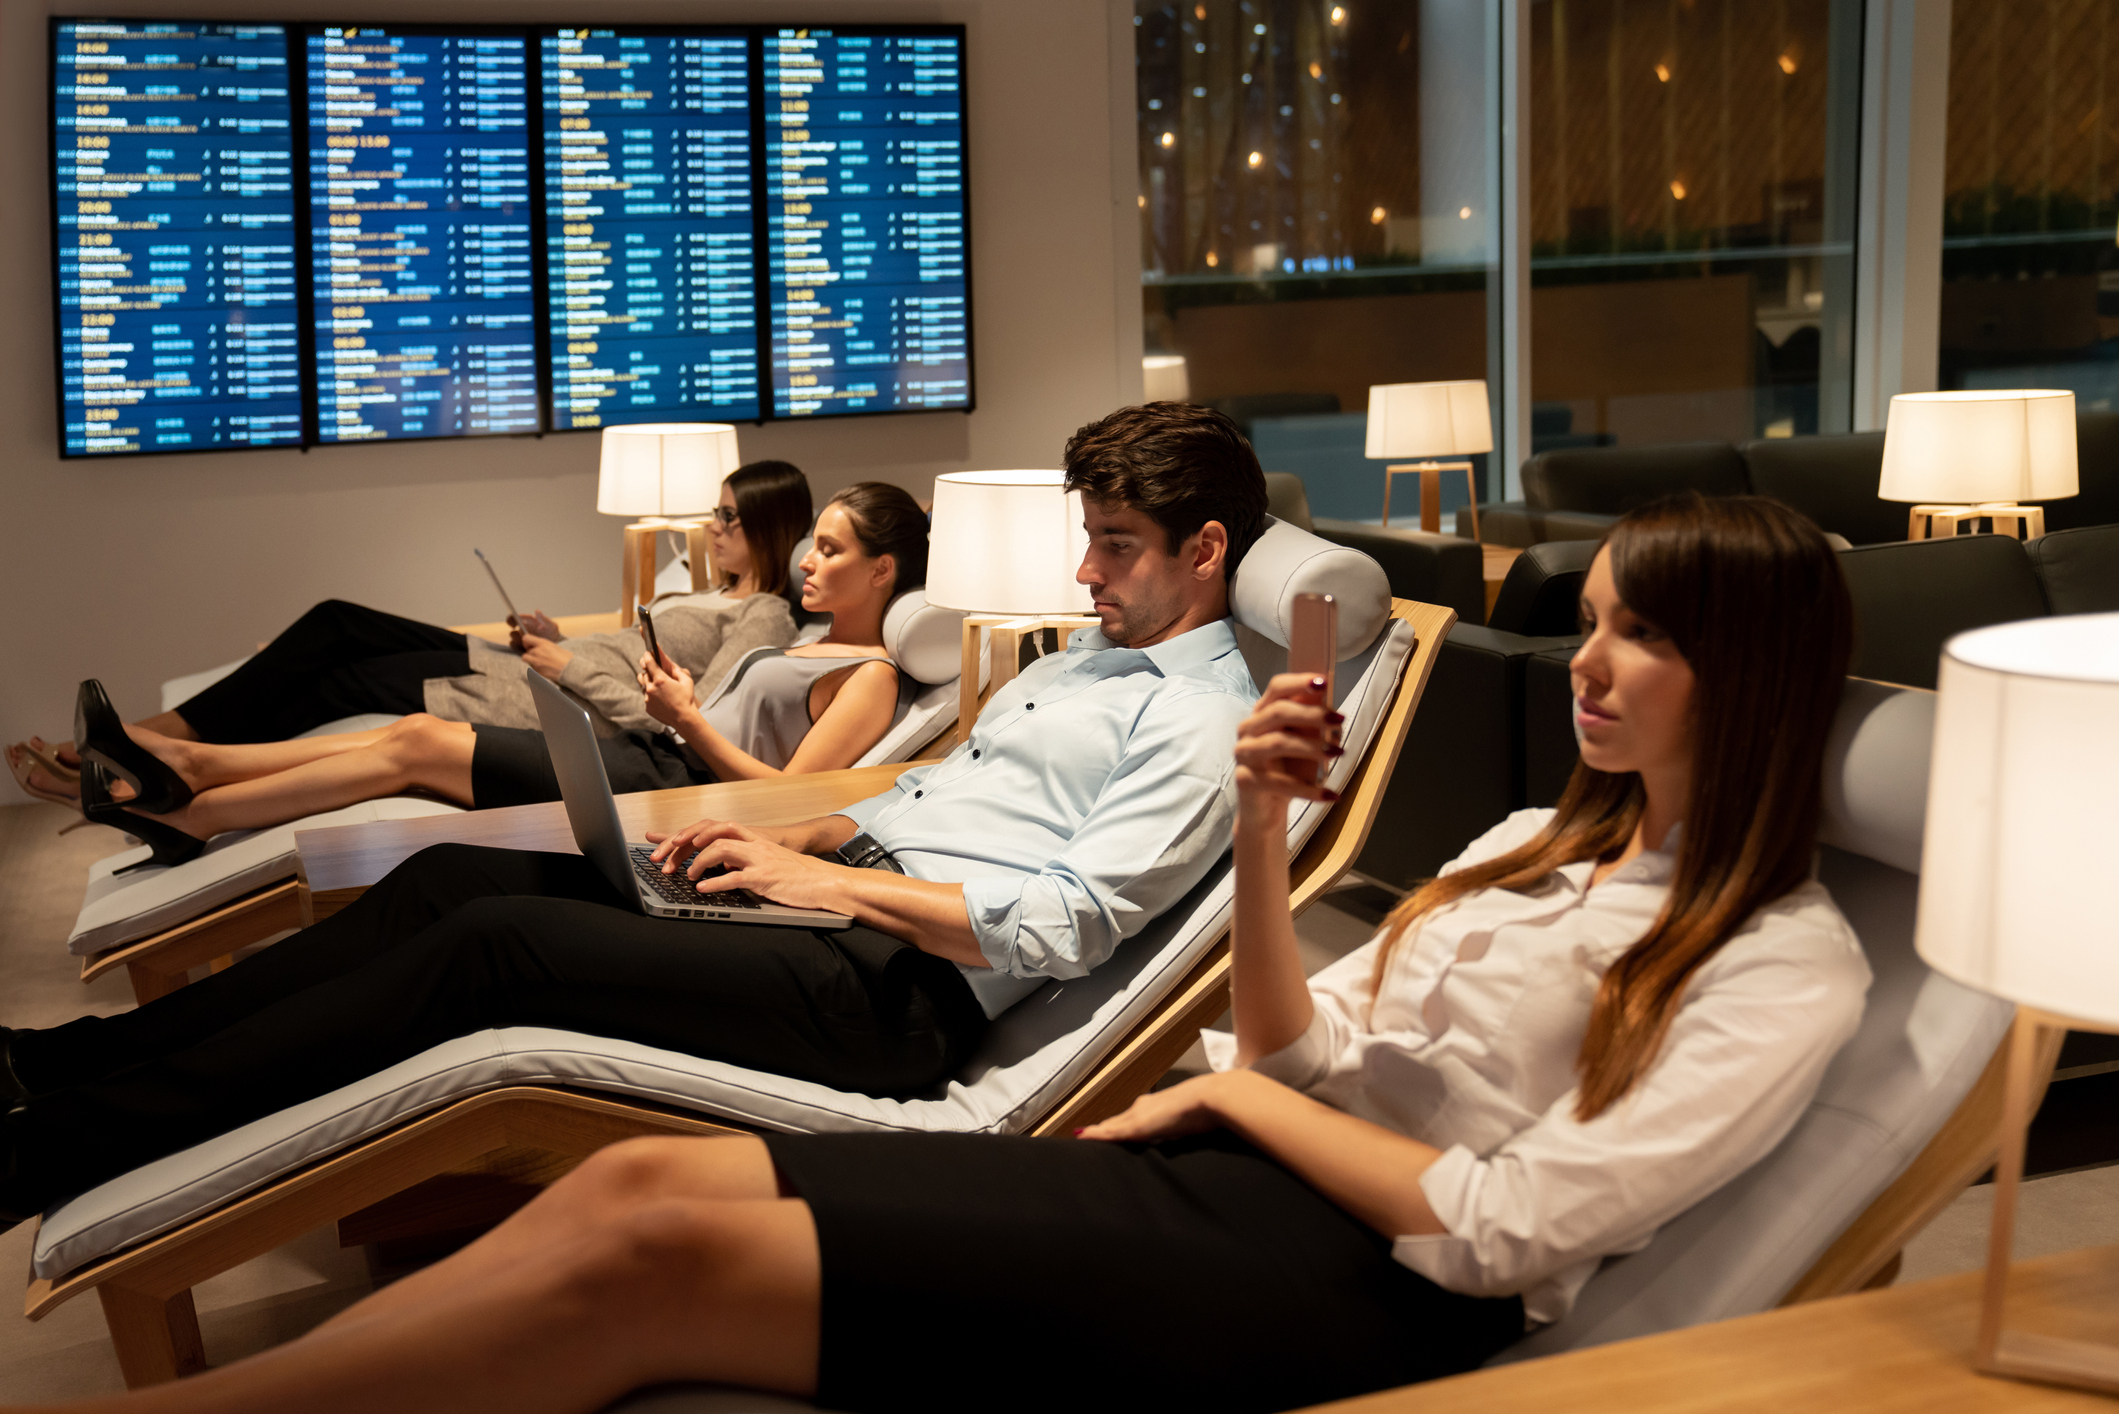 smartly dressed business travelers relaxing in a VIP lounge at the airport and being on their cell phones or laptops while waiting for their flight